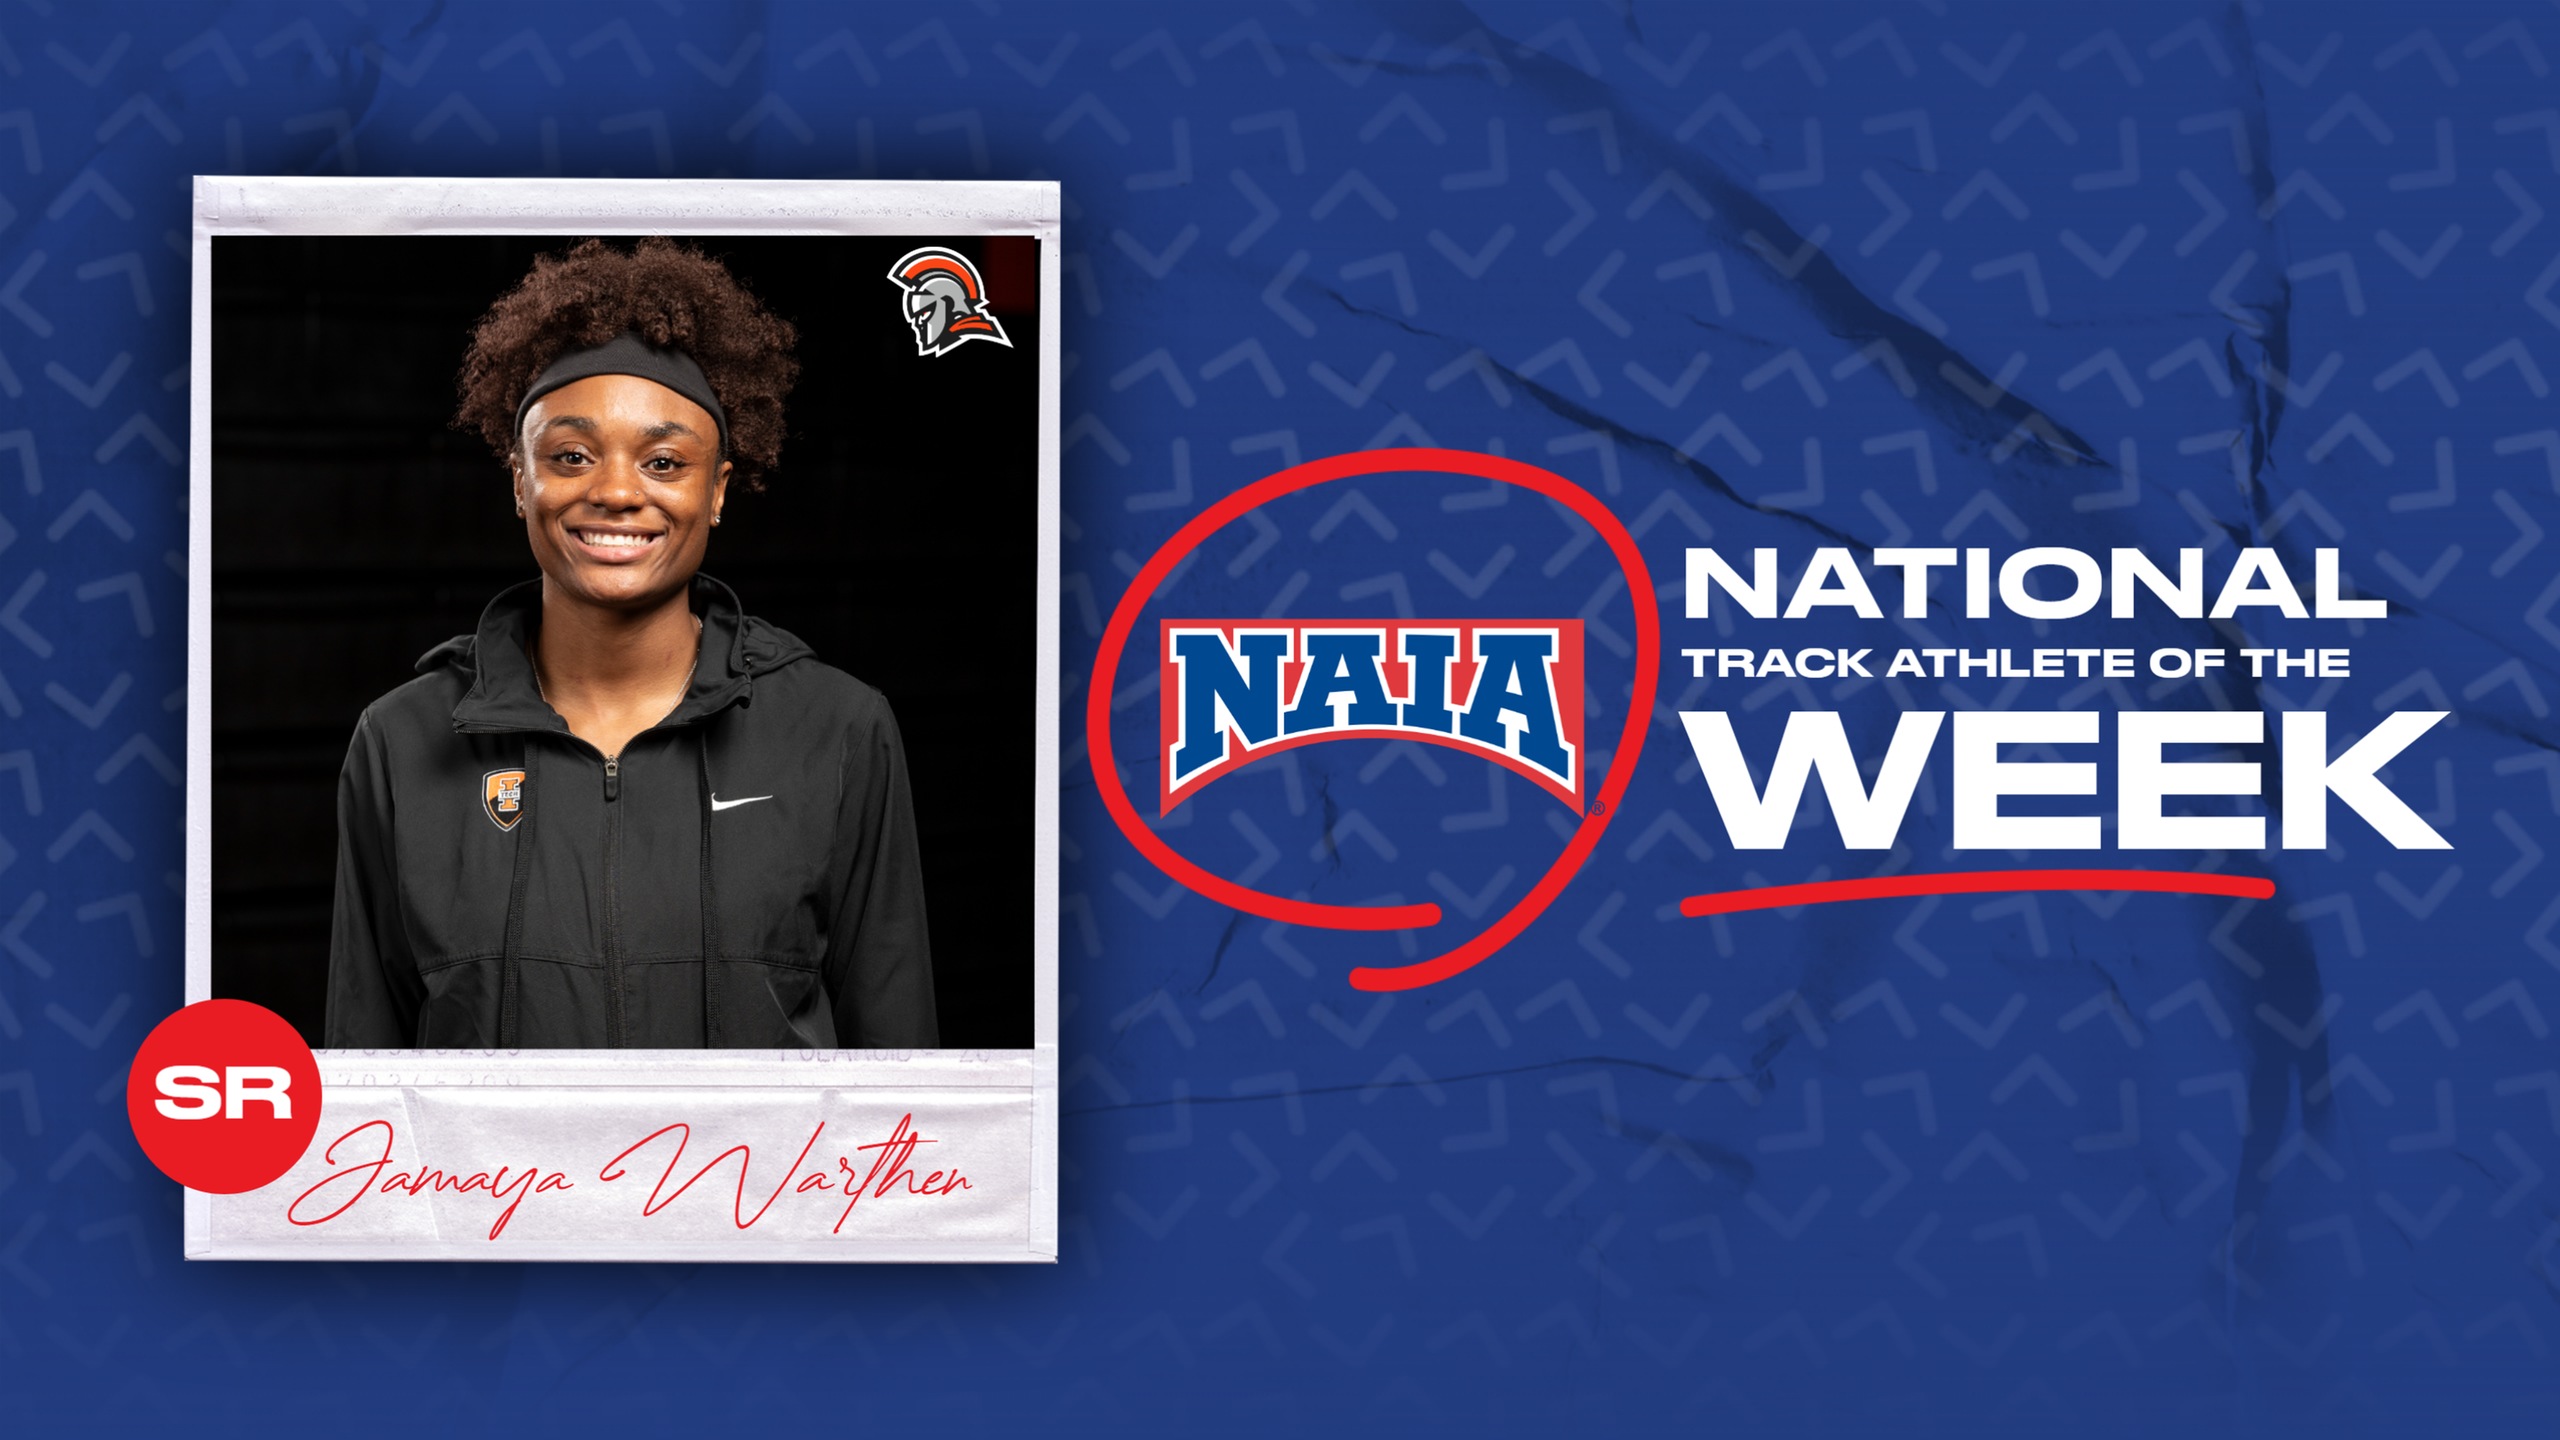 Indiana Tech's Warthen named NAIA National Track Athlete of the Week